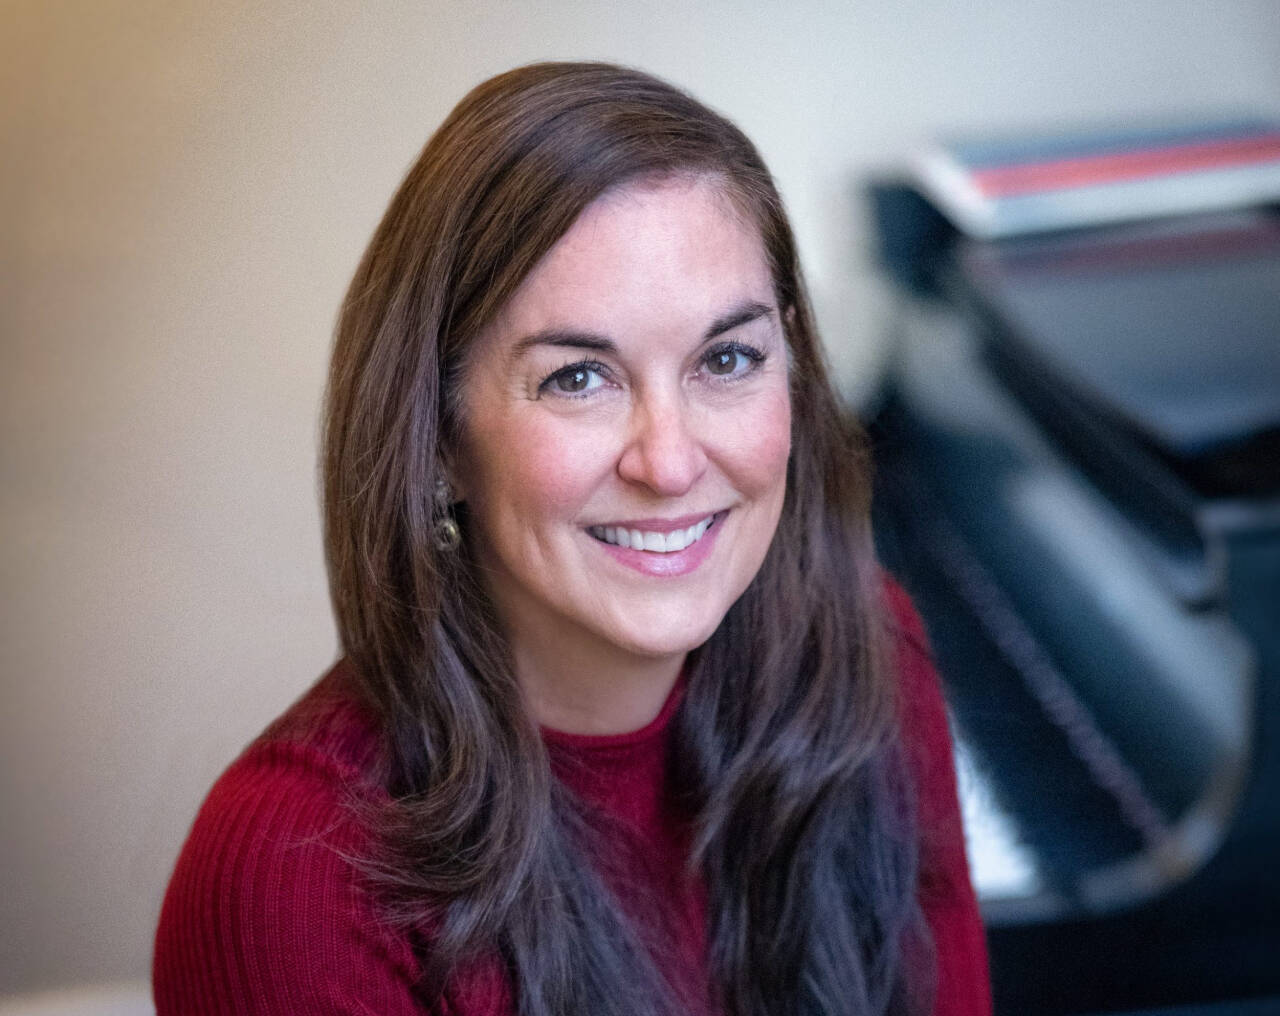 Photo courtesy of Seattle Chamber Music Society
Pianist Paige Roberts Molloy is the guest soloist in this week’s Port Angeles Chamber Orchestra concerts.